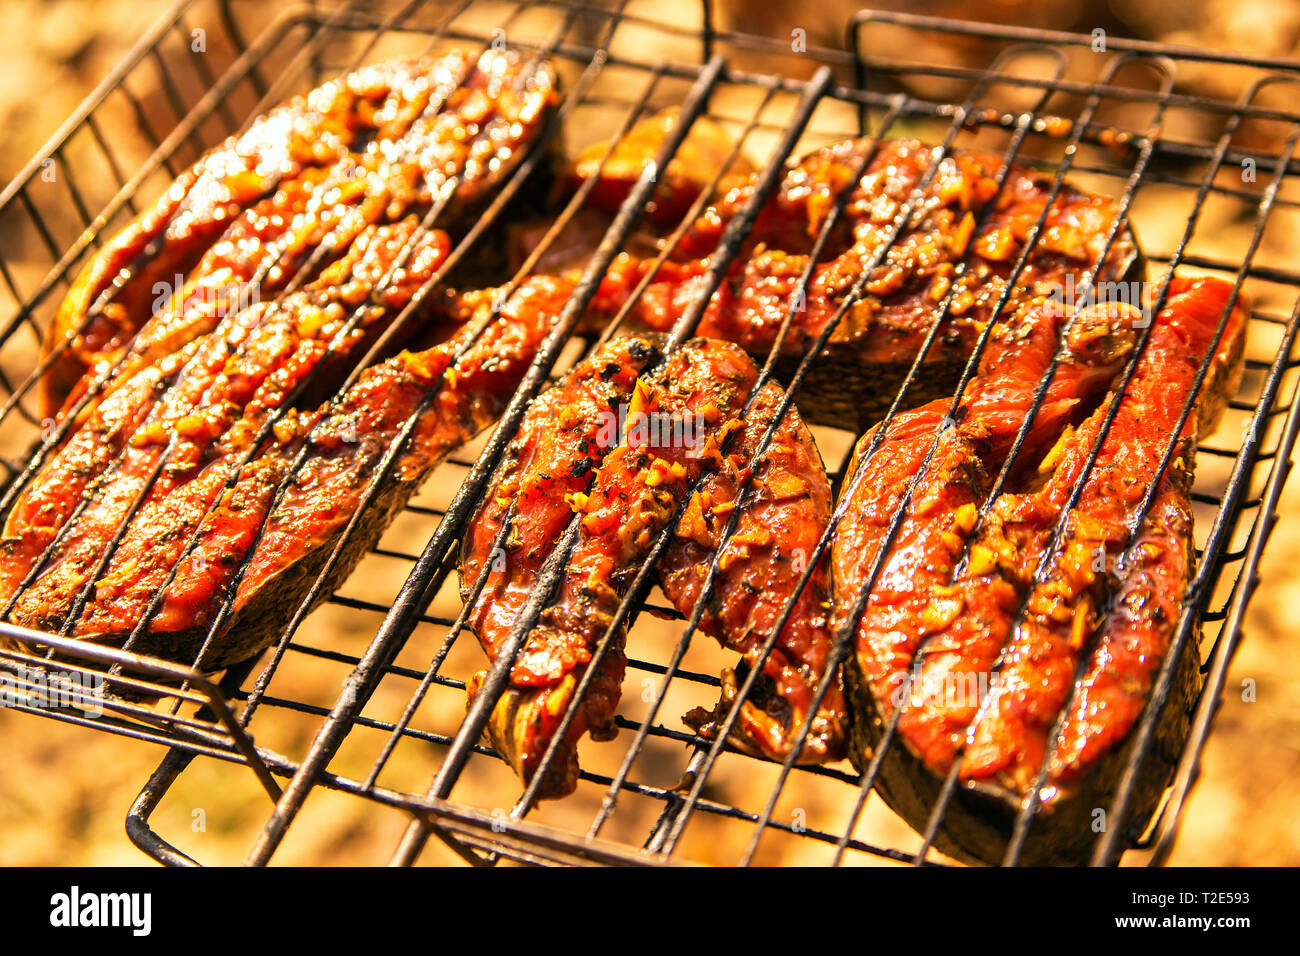 grilling salmon steak with ginger marinade in grid over barbecue. Top view  grilled salmon on flaming braai Stock Photo - Alamy